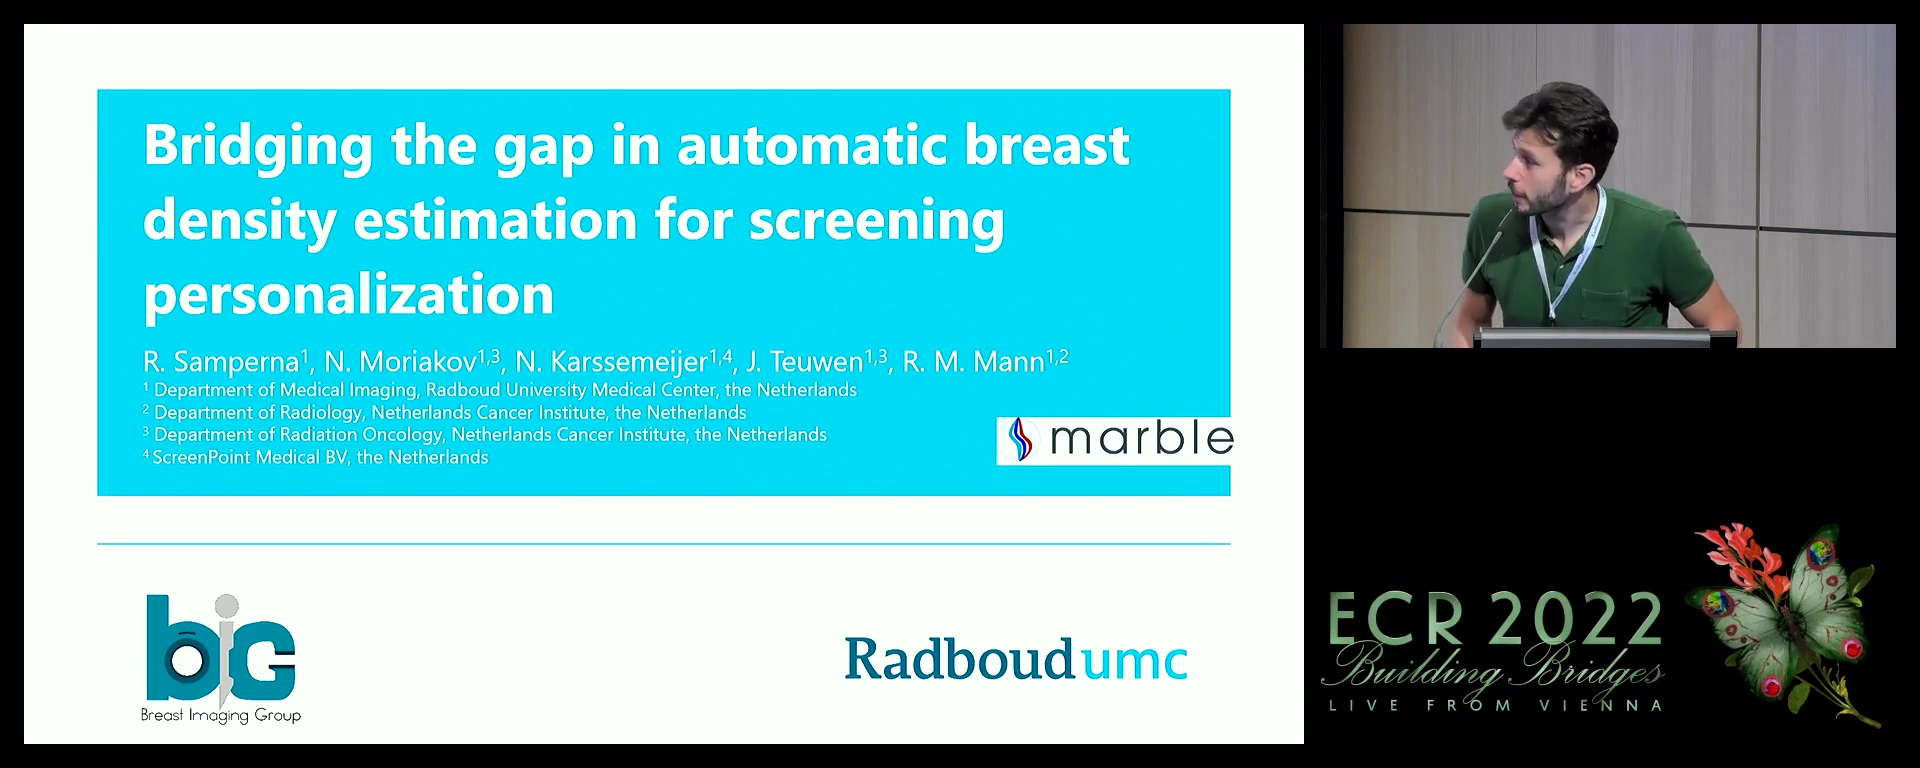 Bridging the gap in automatic breast density estimation for screening personalisation